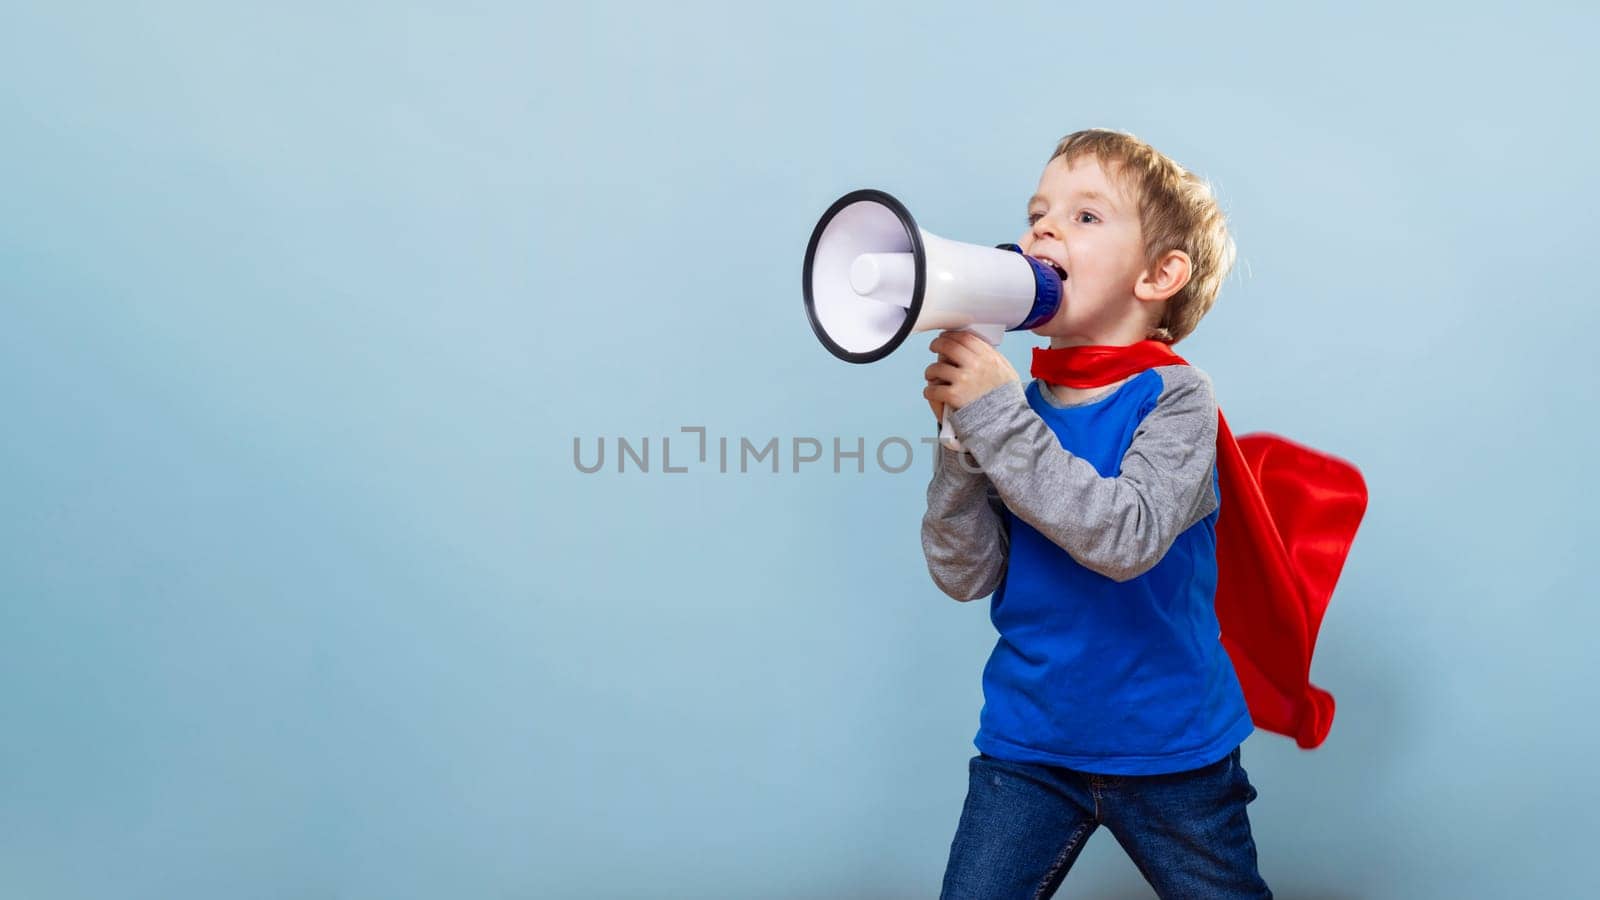 Child in superhero costume with red cape shouting into megaphone against blue background. Kid imagination and play concept. Design for banner, poster, invitation with copy space.